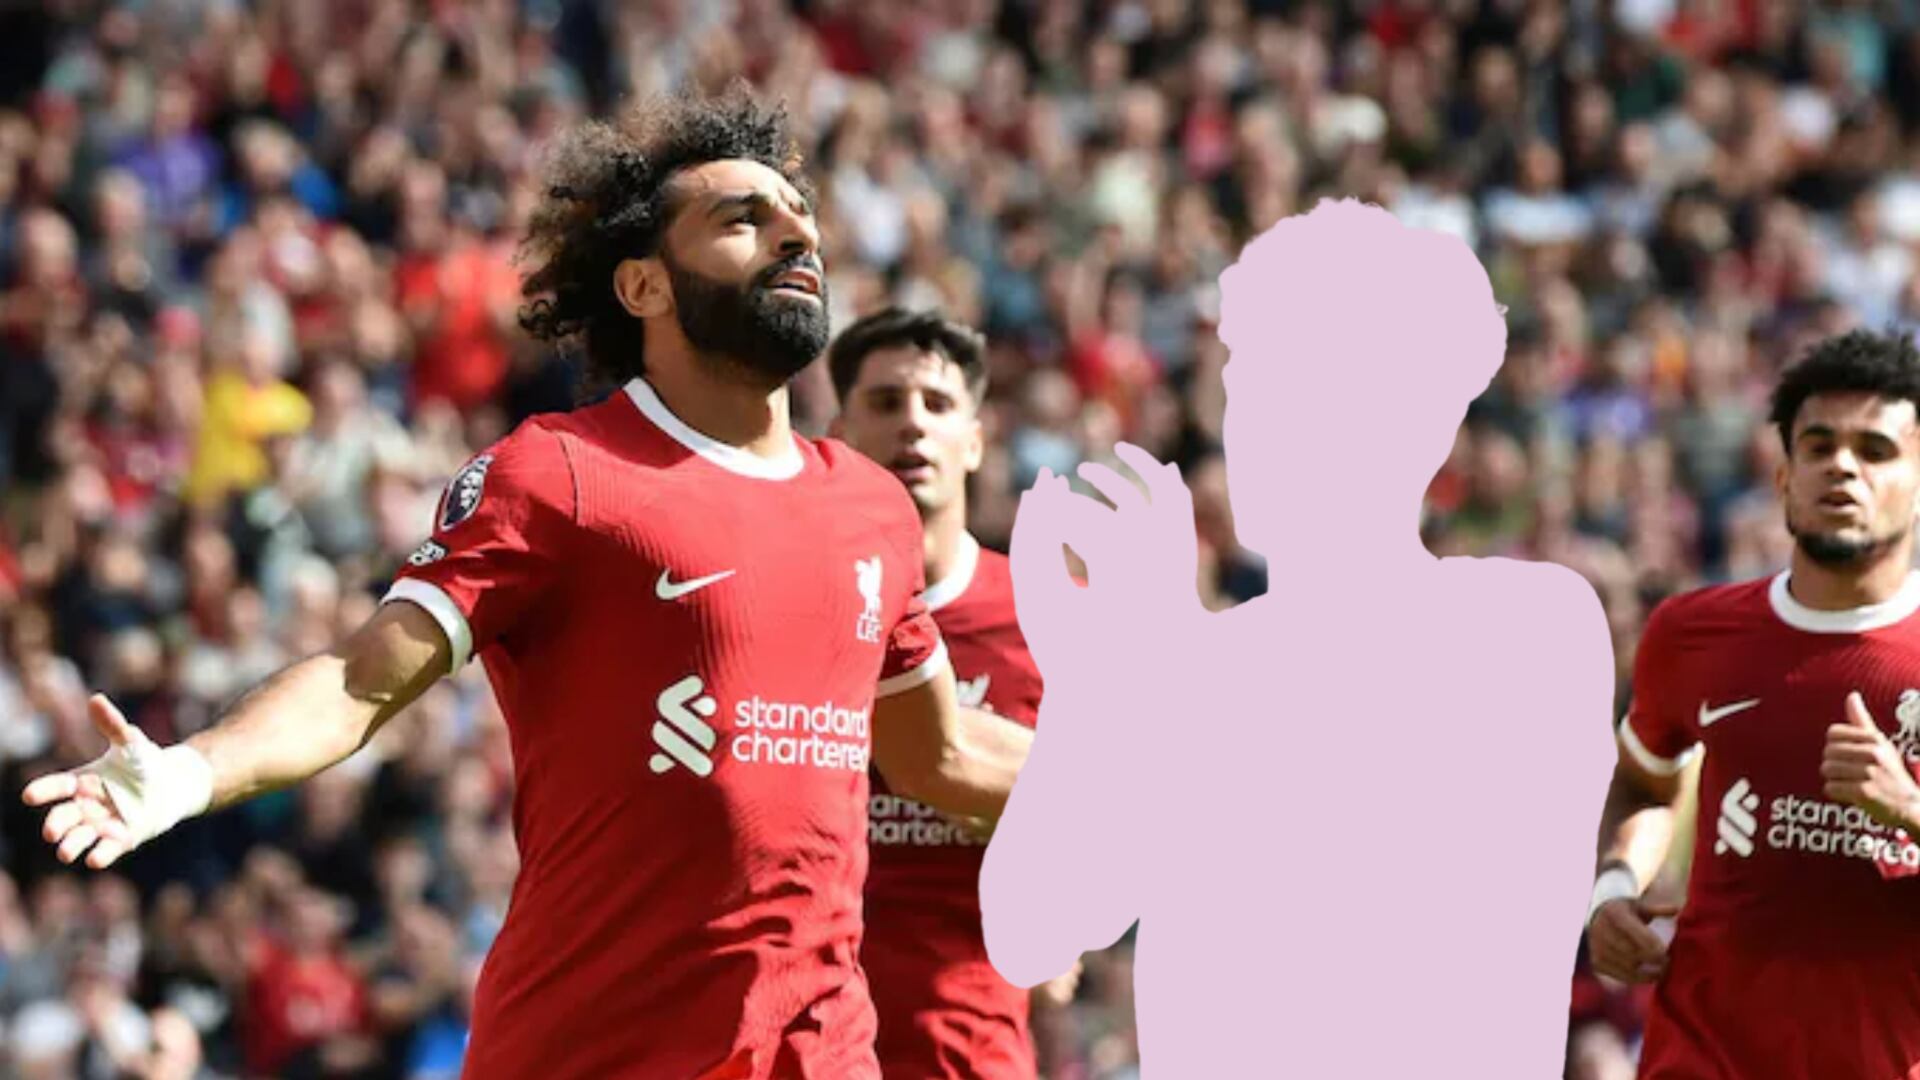 Not Salah, the Liverpool player who wants to become the best player in the world